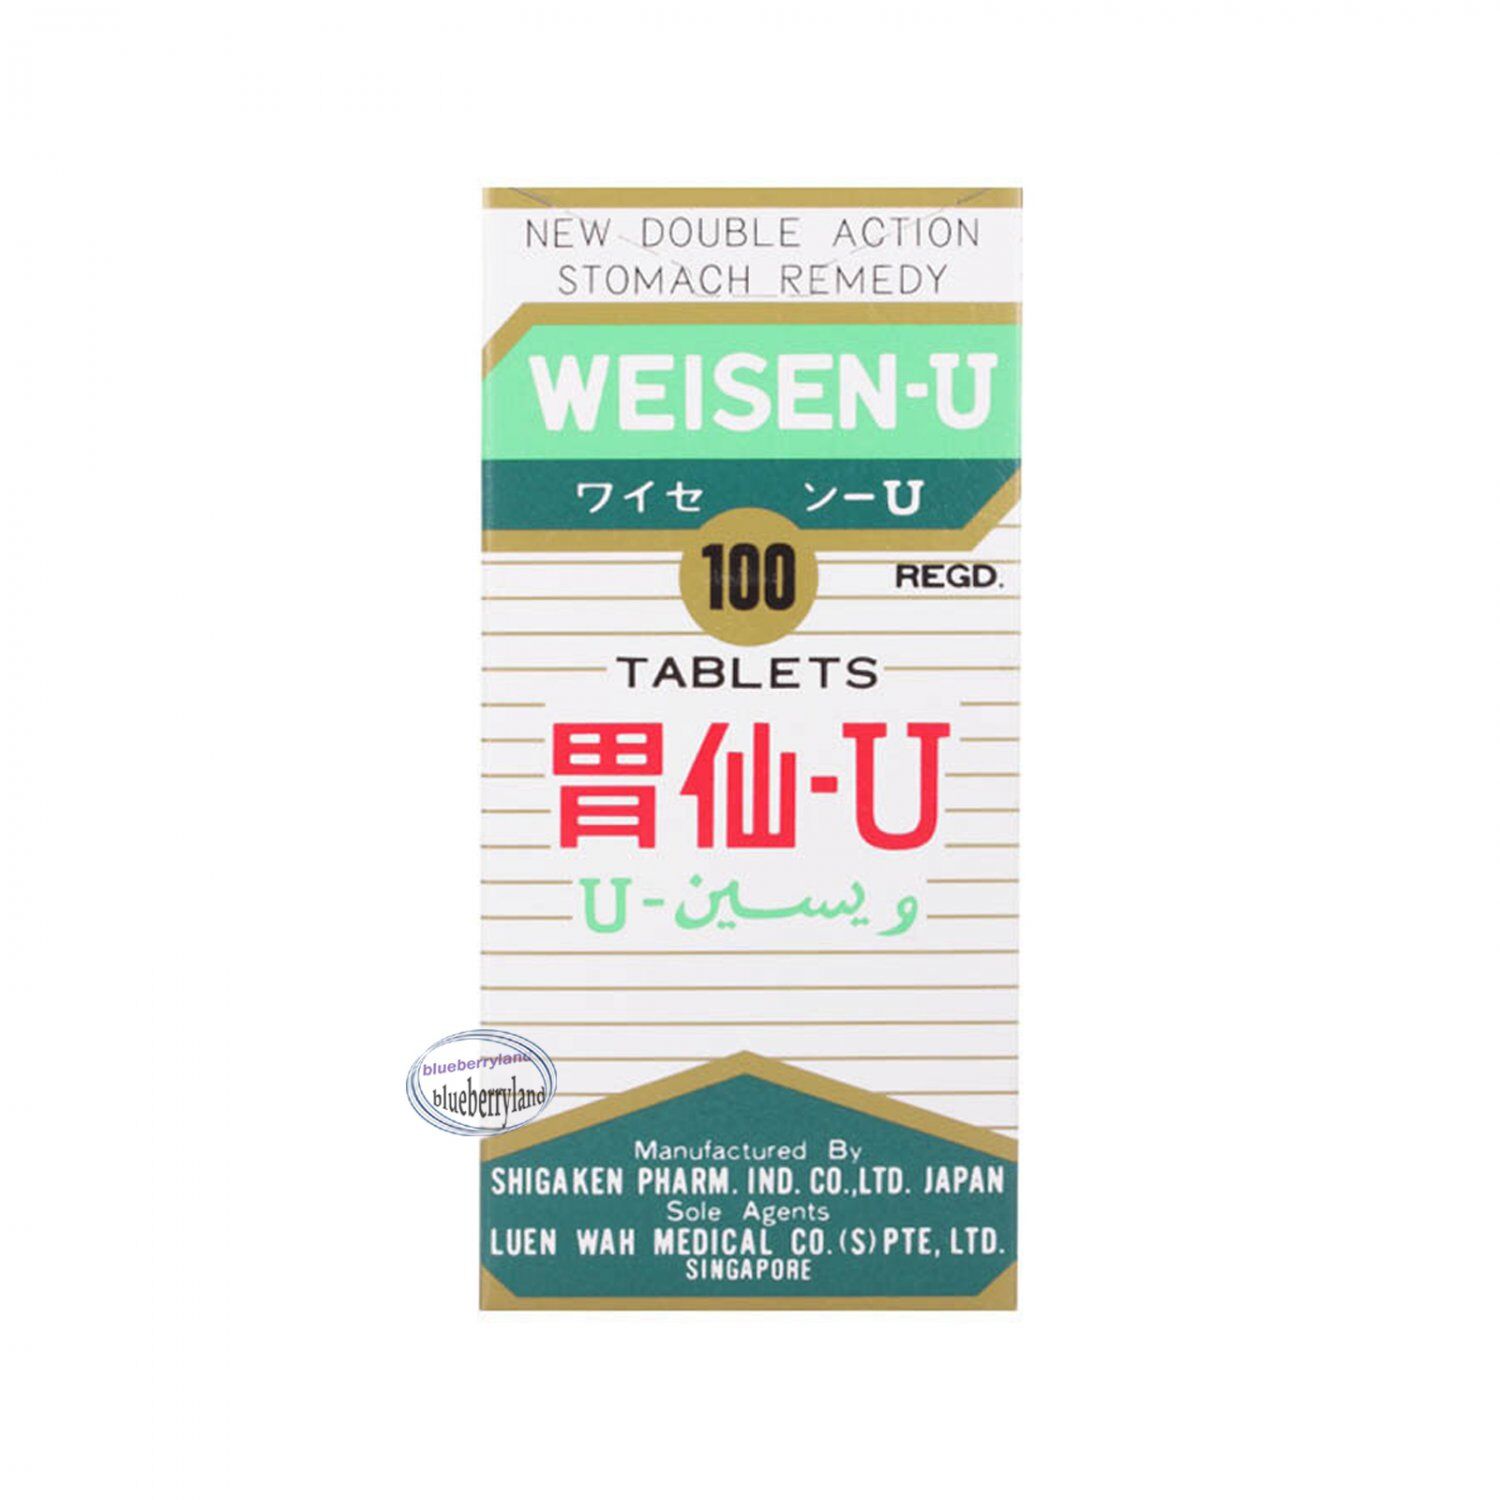 Weisen-U New Double Action Stomach Remedy -100's